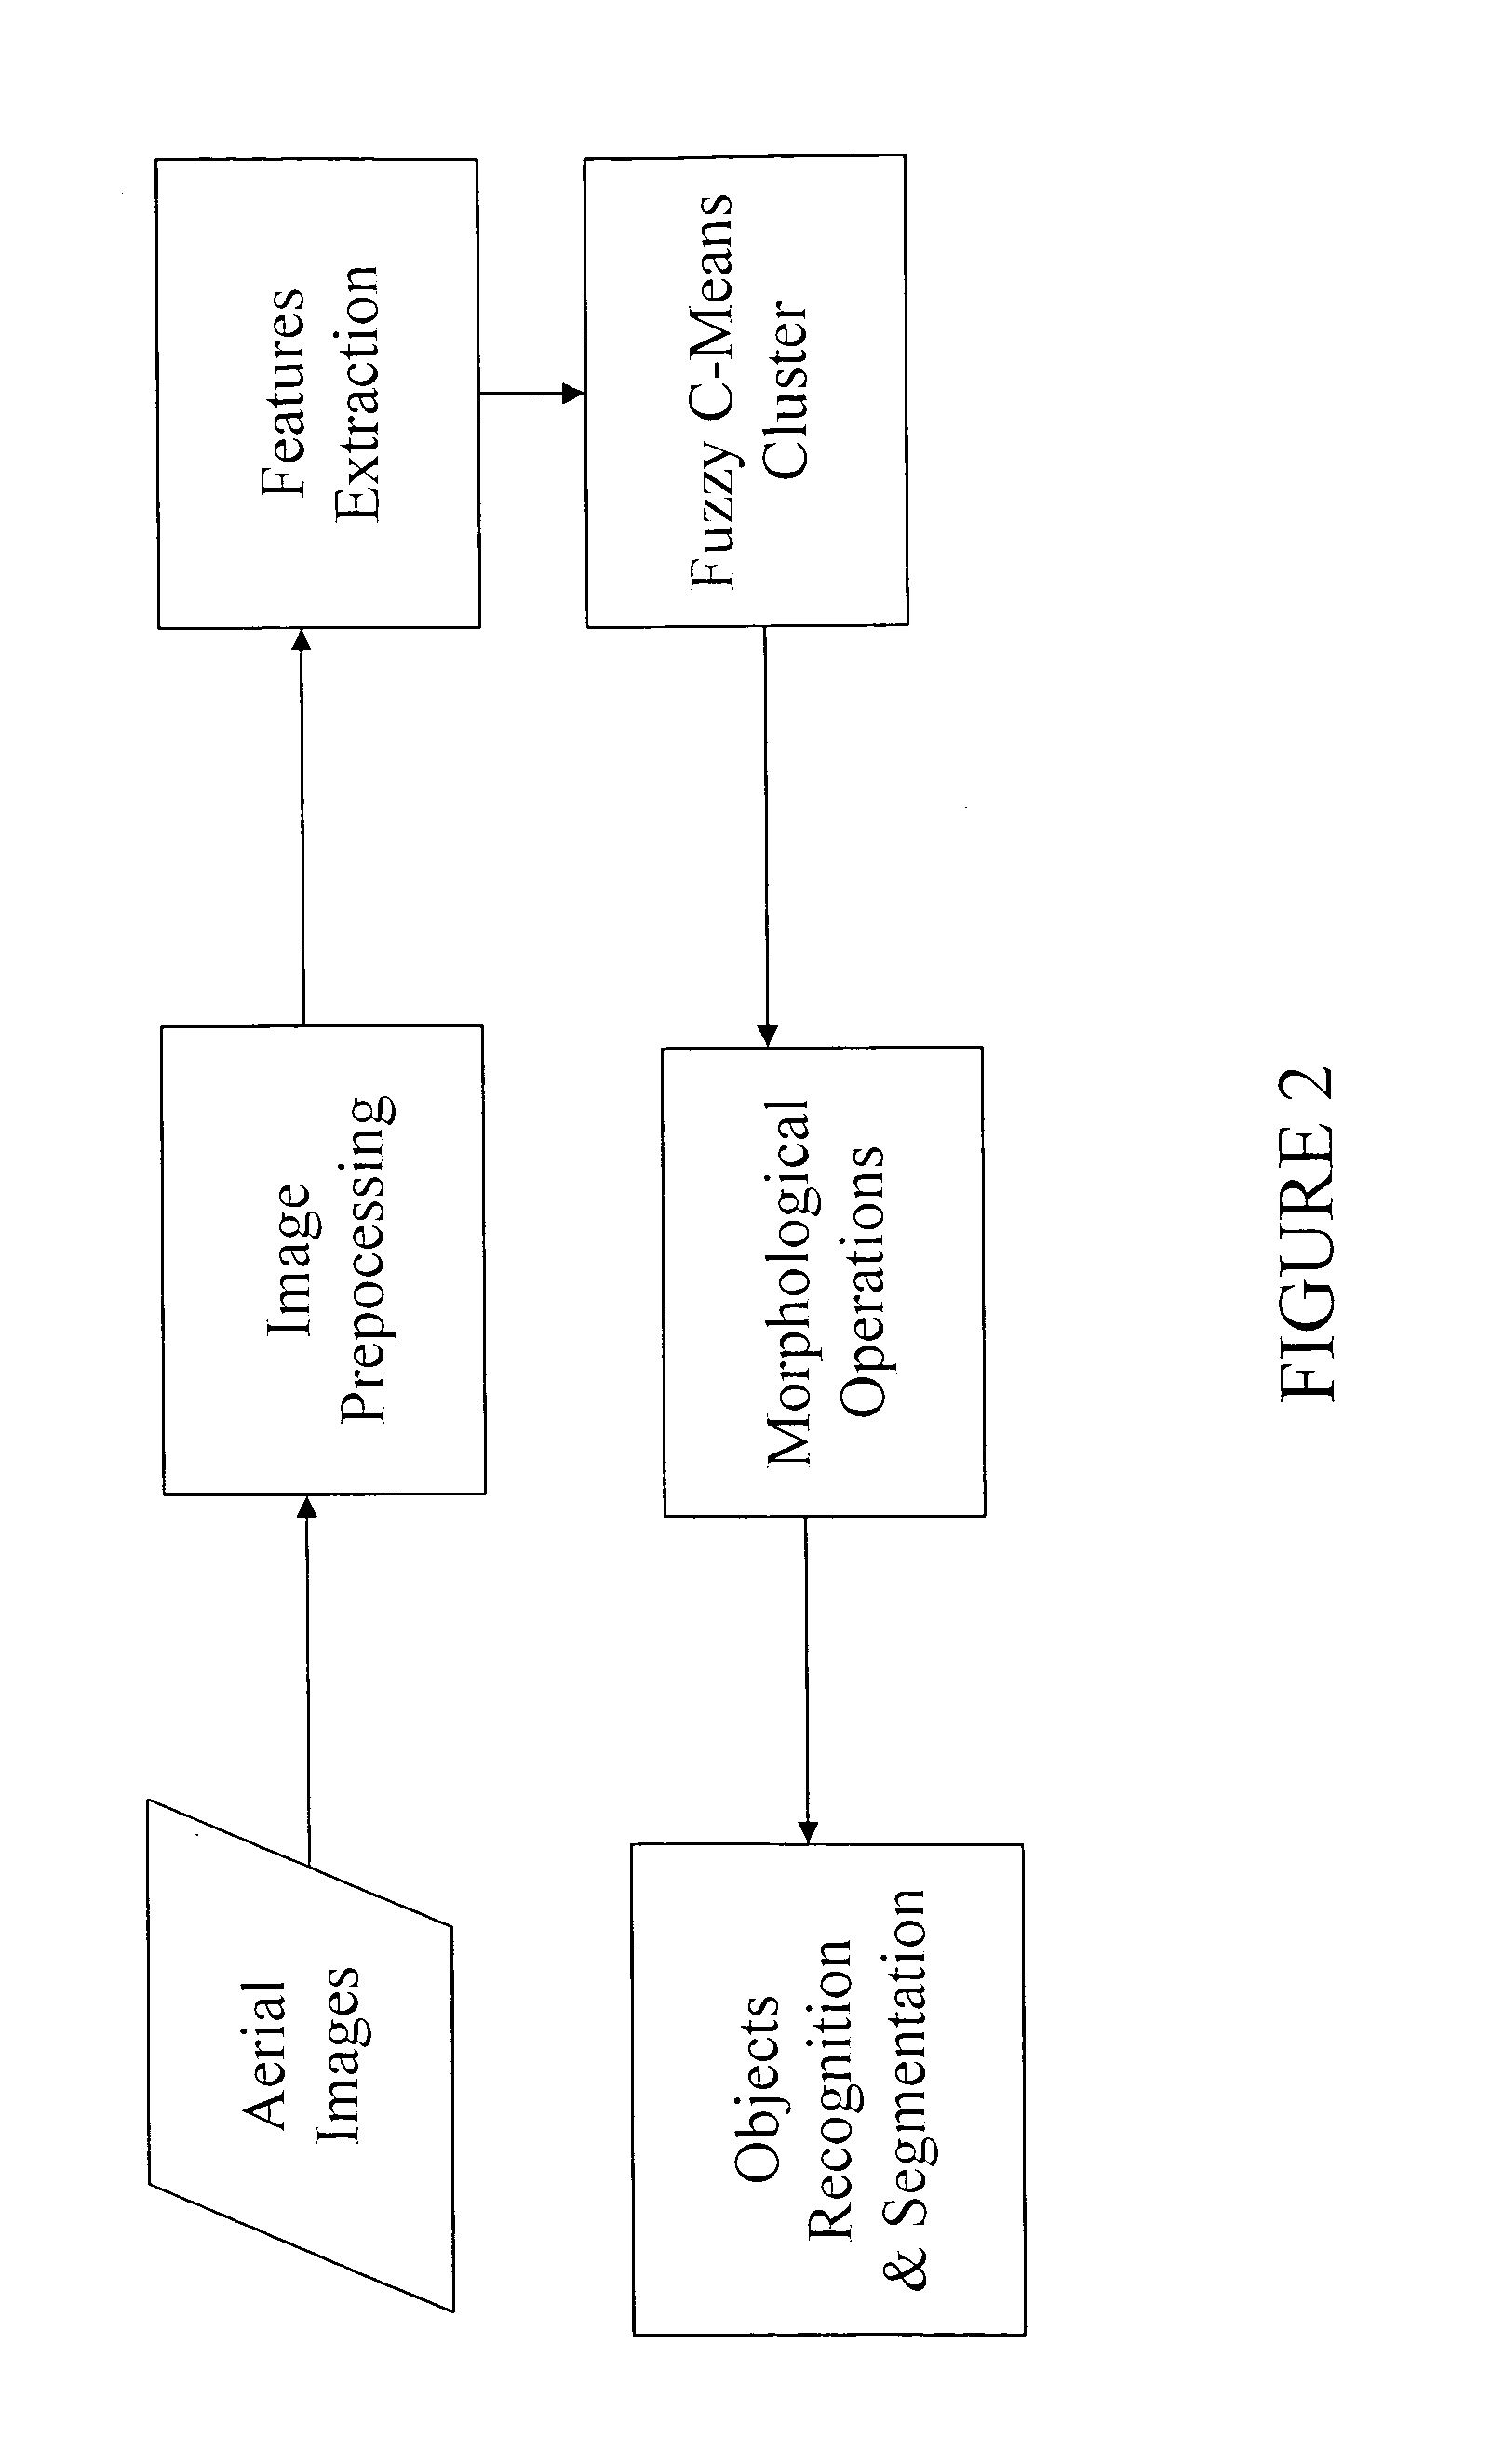 Integrated collision avoidance system for air vehicle